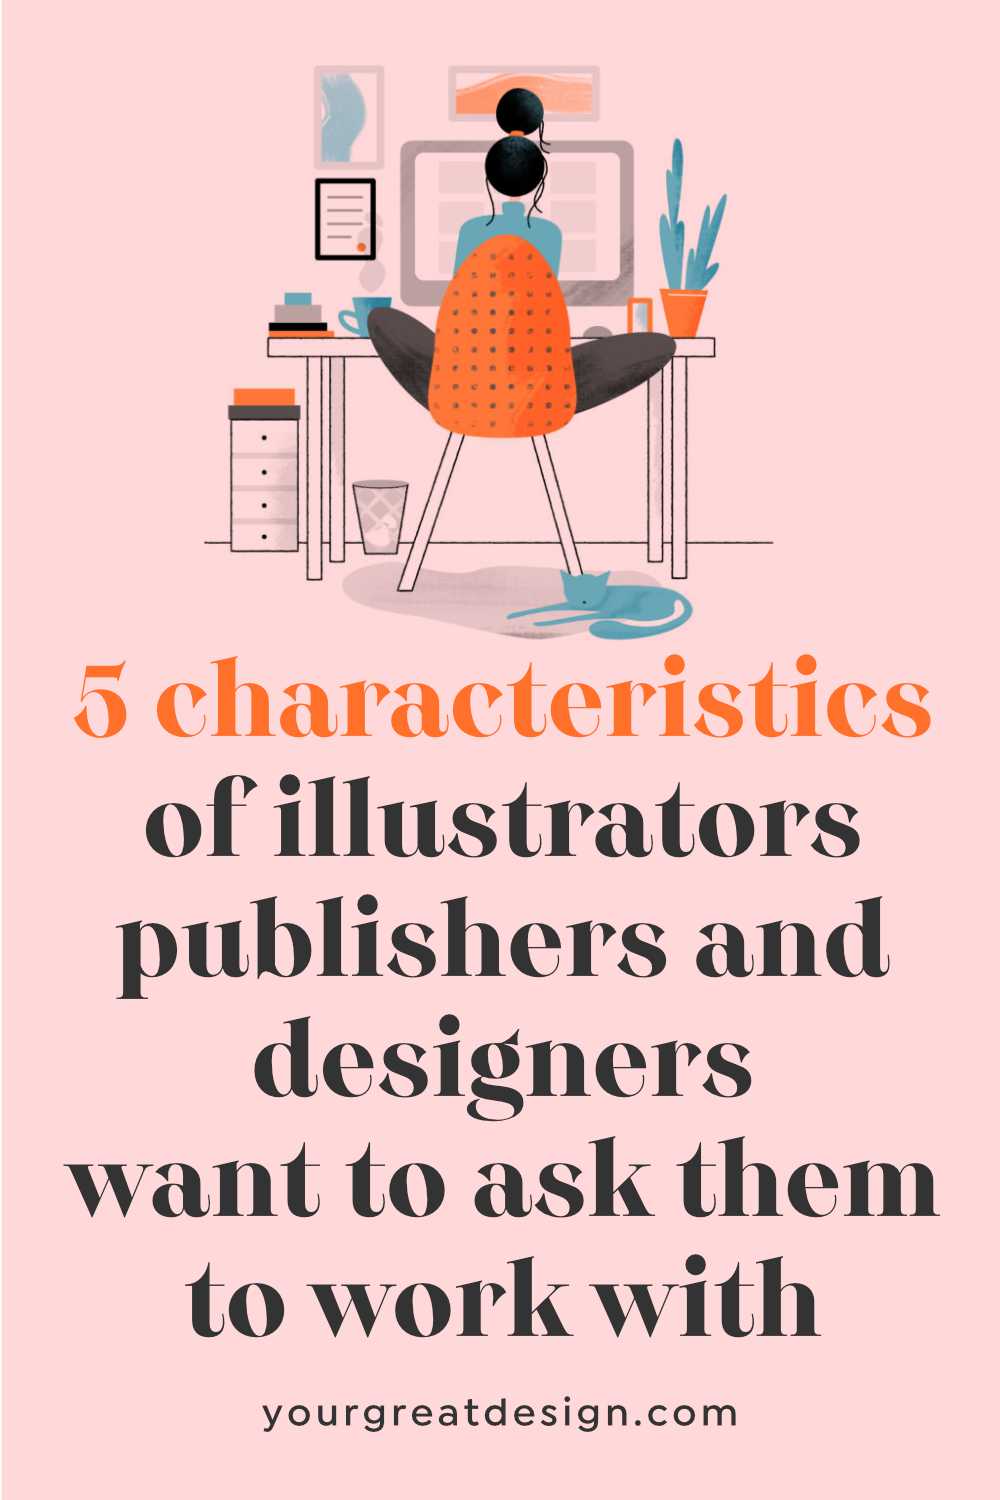 5 characteristics of illustrators that publishers and designers want to ask them to work with